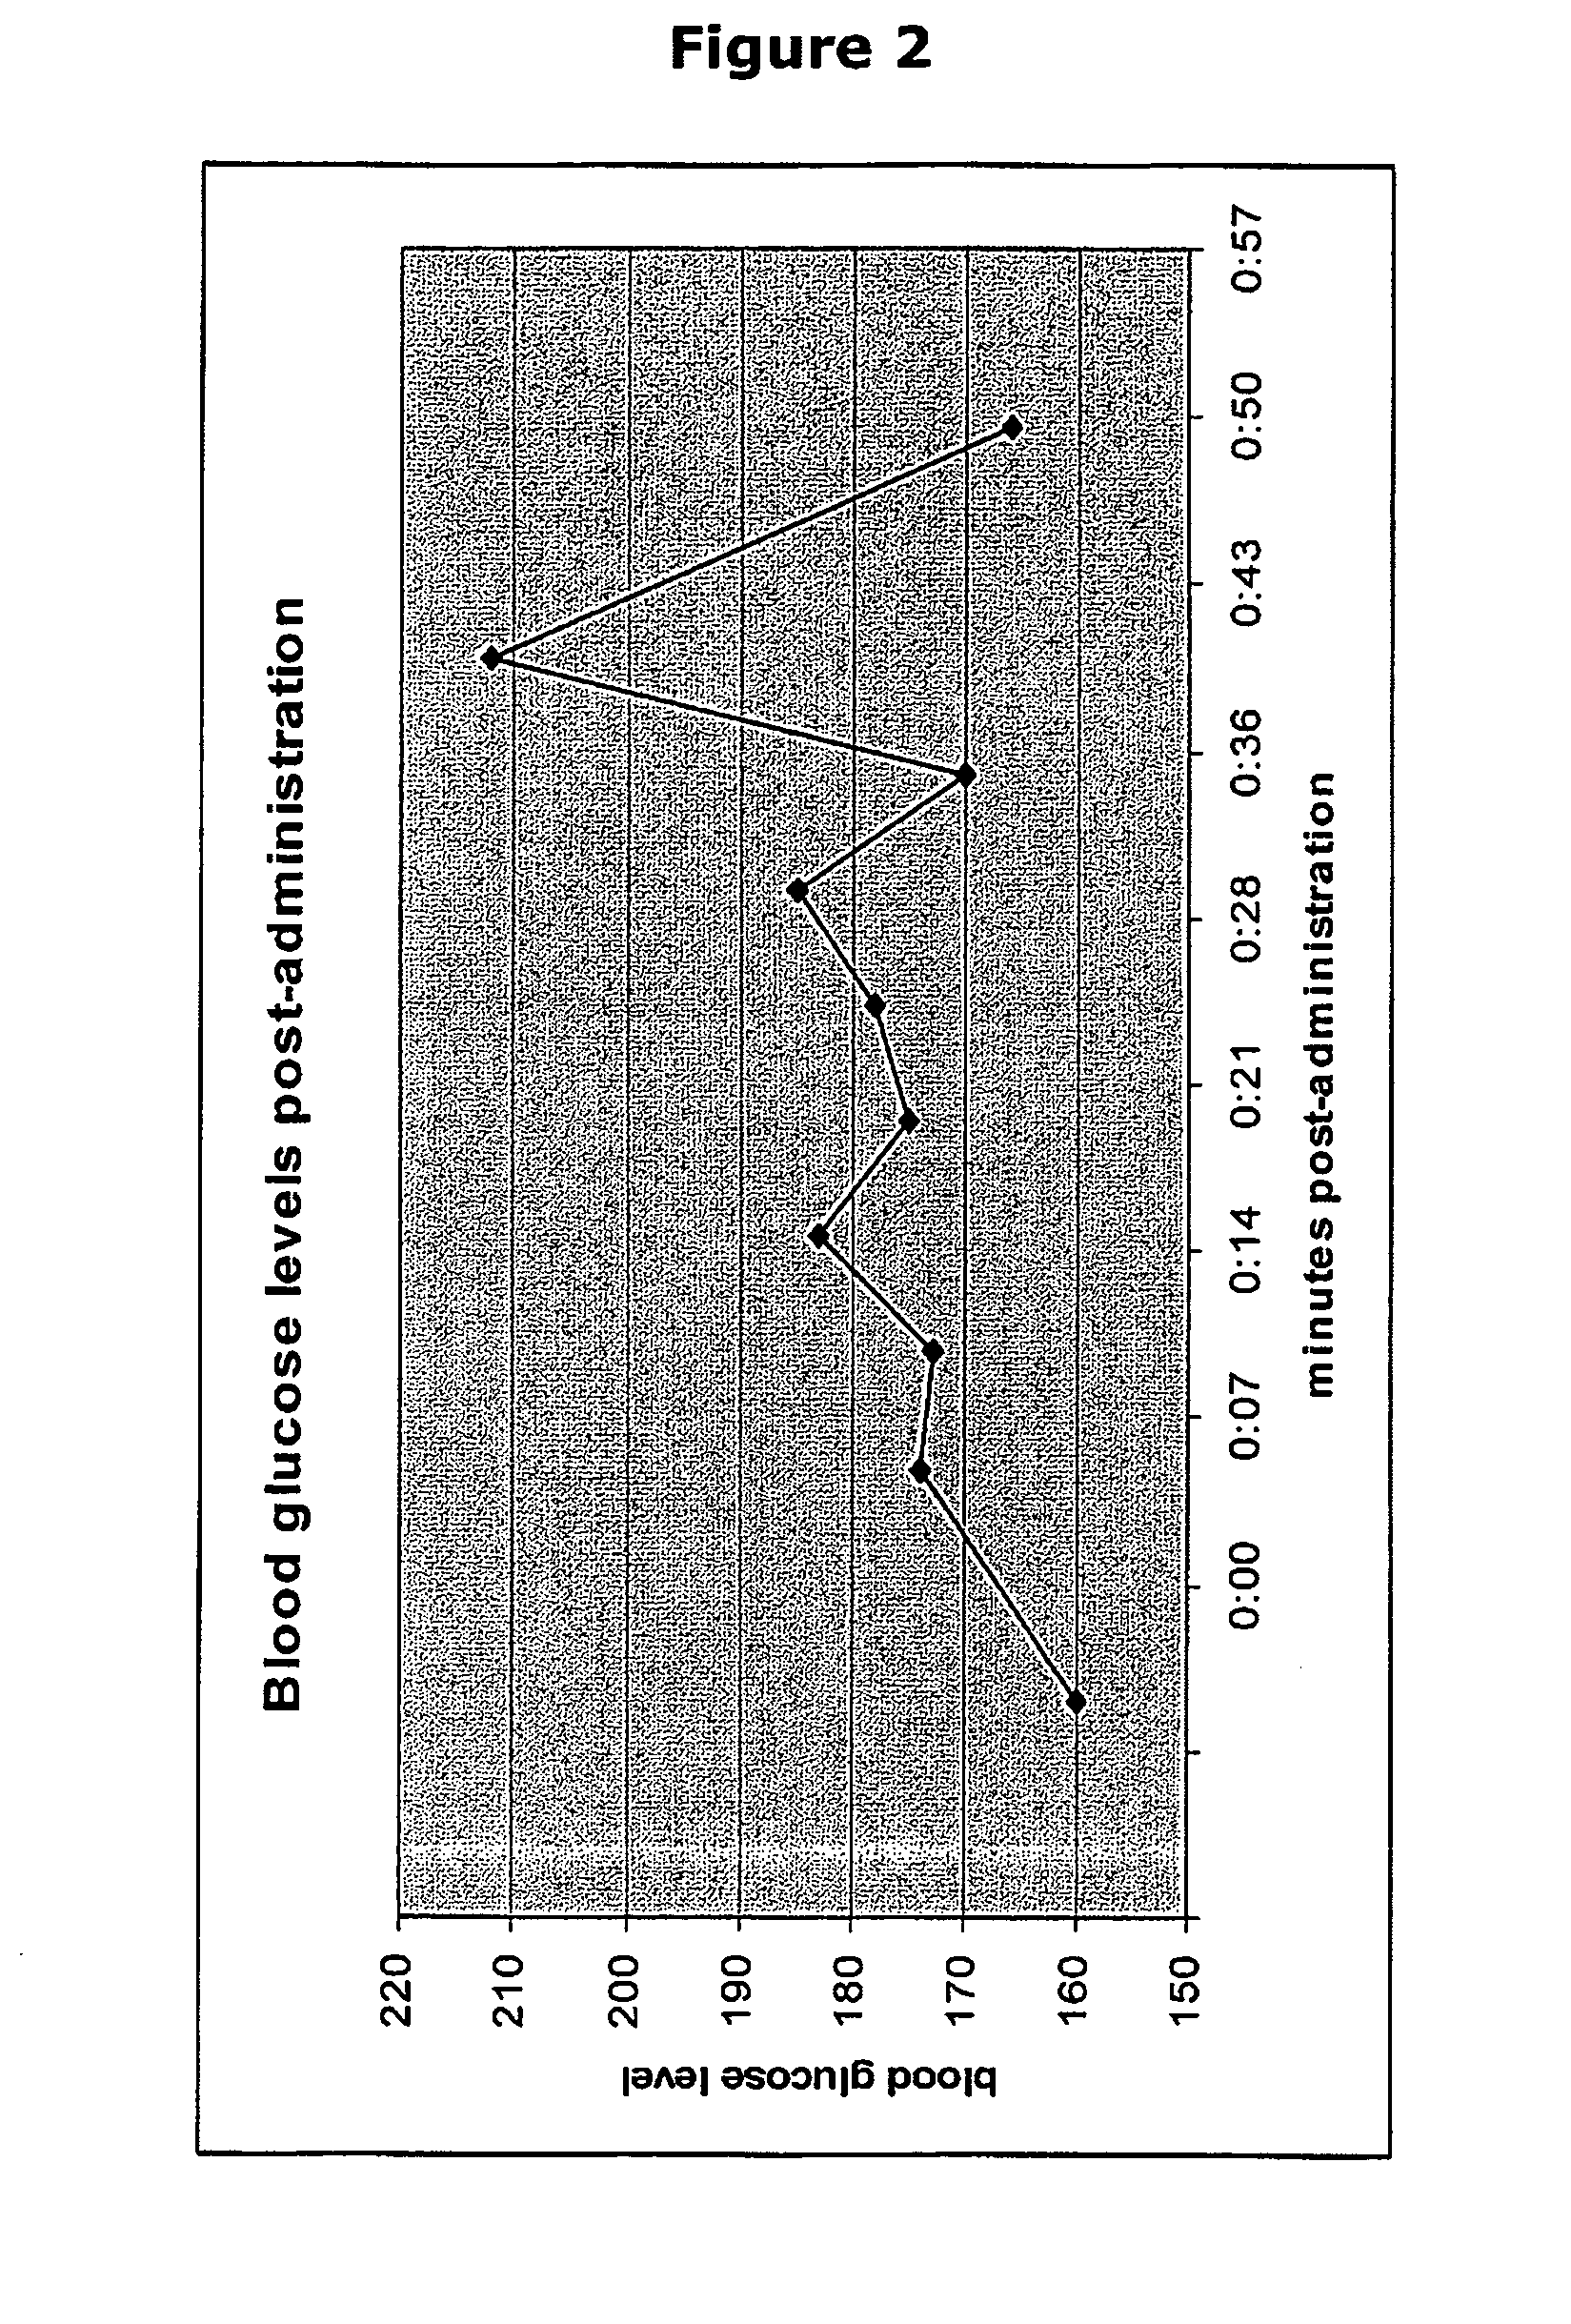 Composition and method for raising blood glucose level